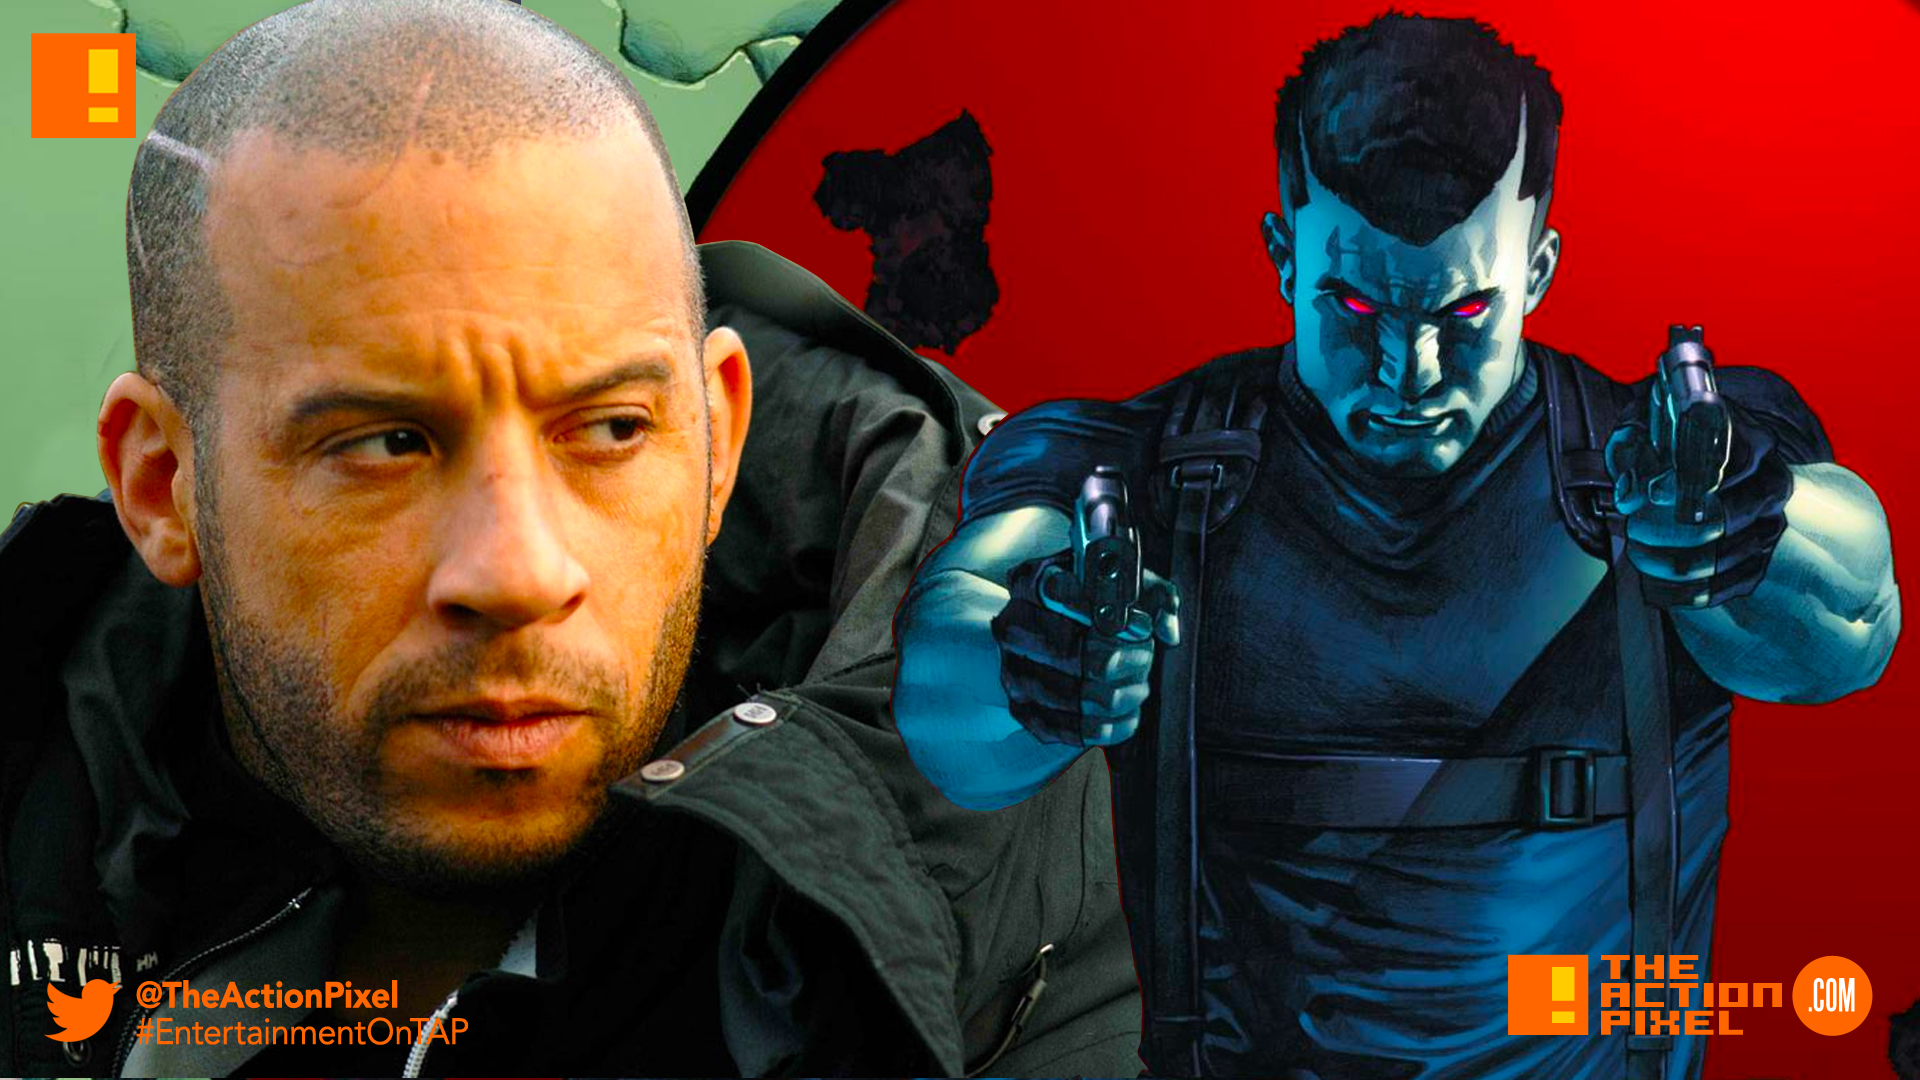 vin diesel, sony, sony pictures, bloodshot, Angelo Mortalli, entertainment on tap, valiant comics, the action pixel,